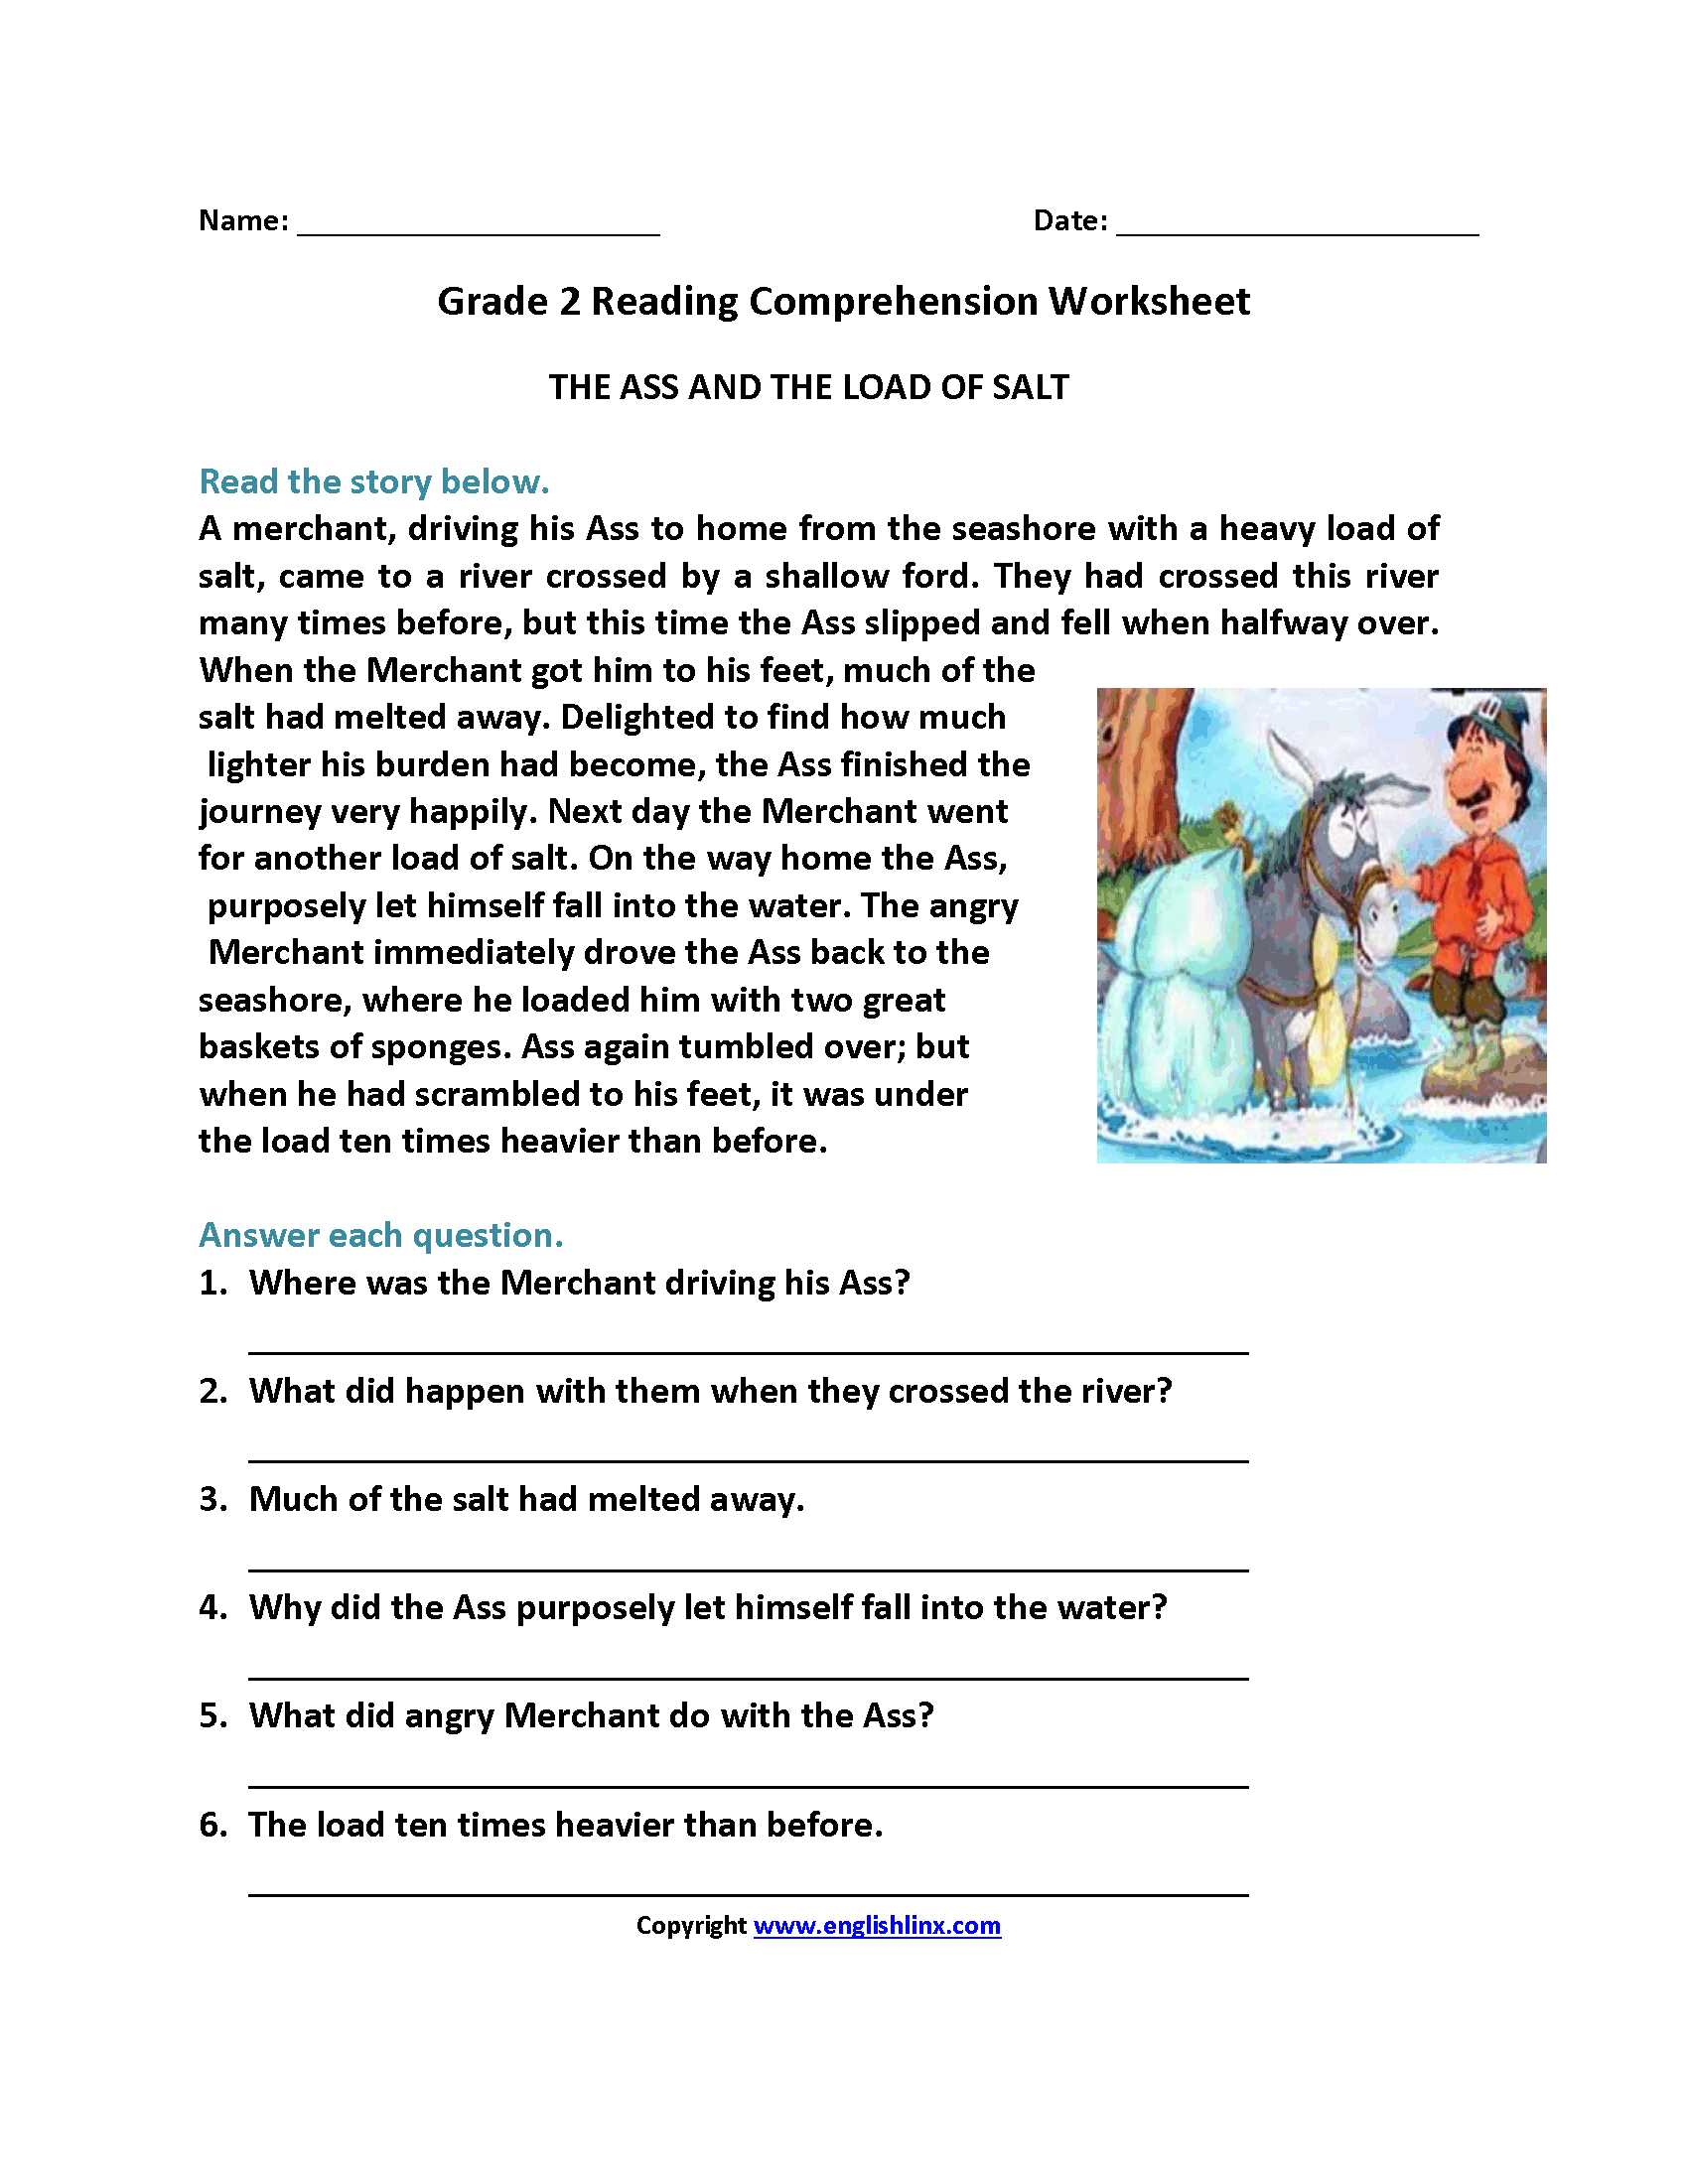 American Civil War Reading Comprehension Worksheet Answers and 2 Grade Reading the Best Worksheets Image Collection